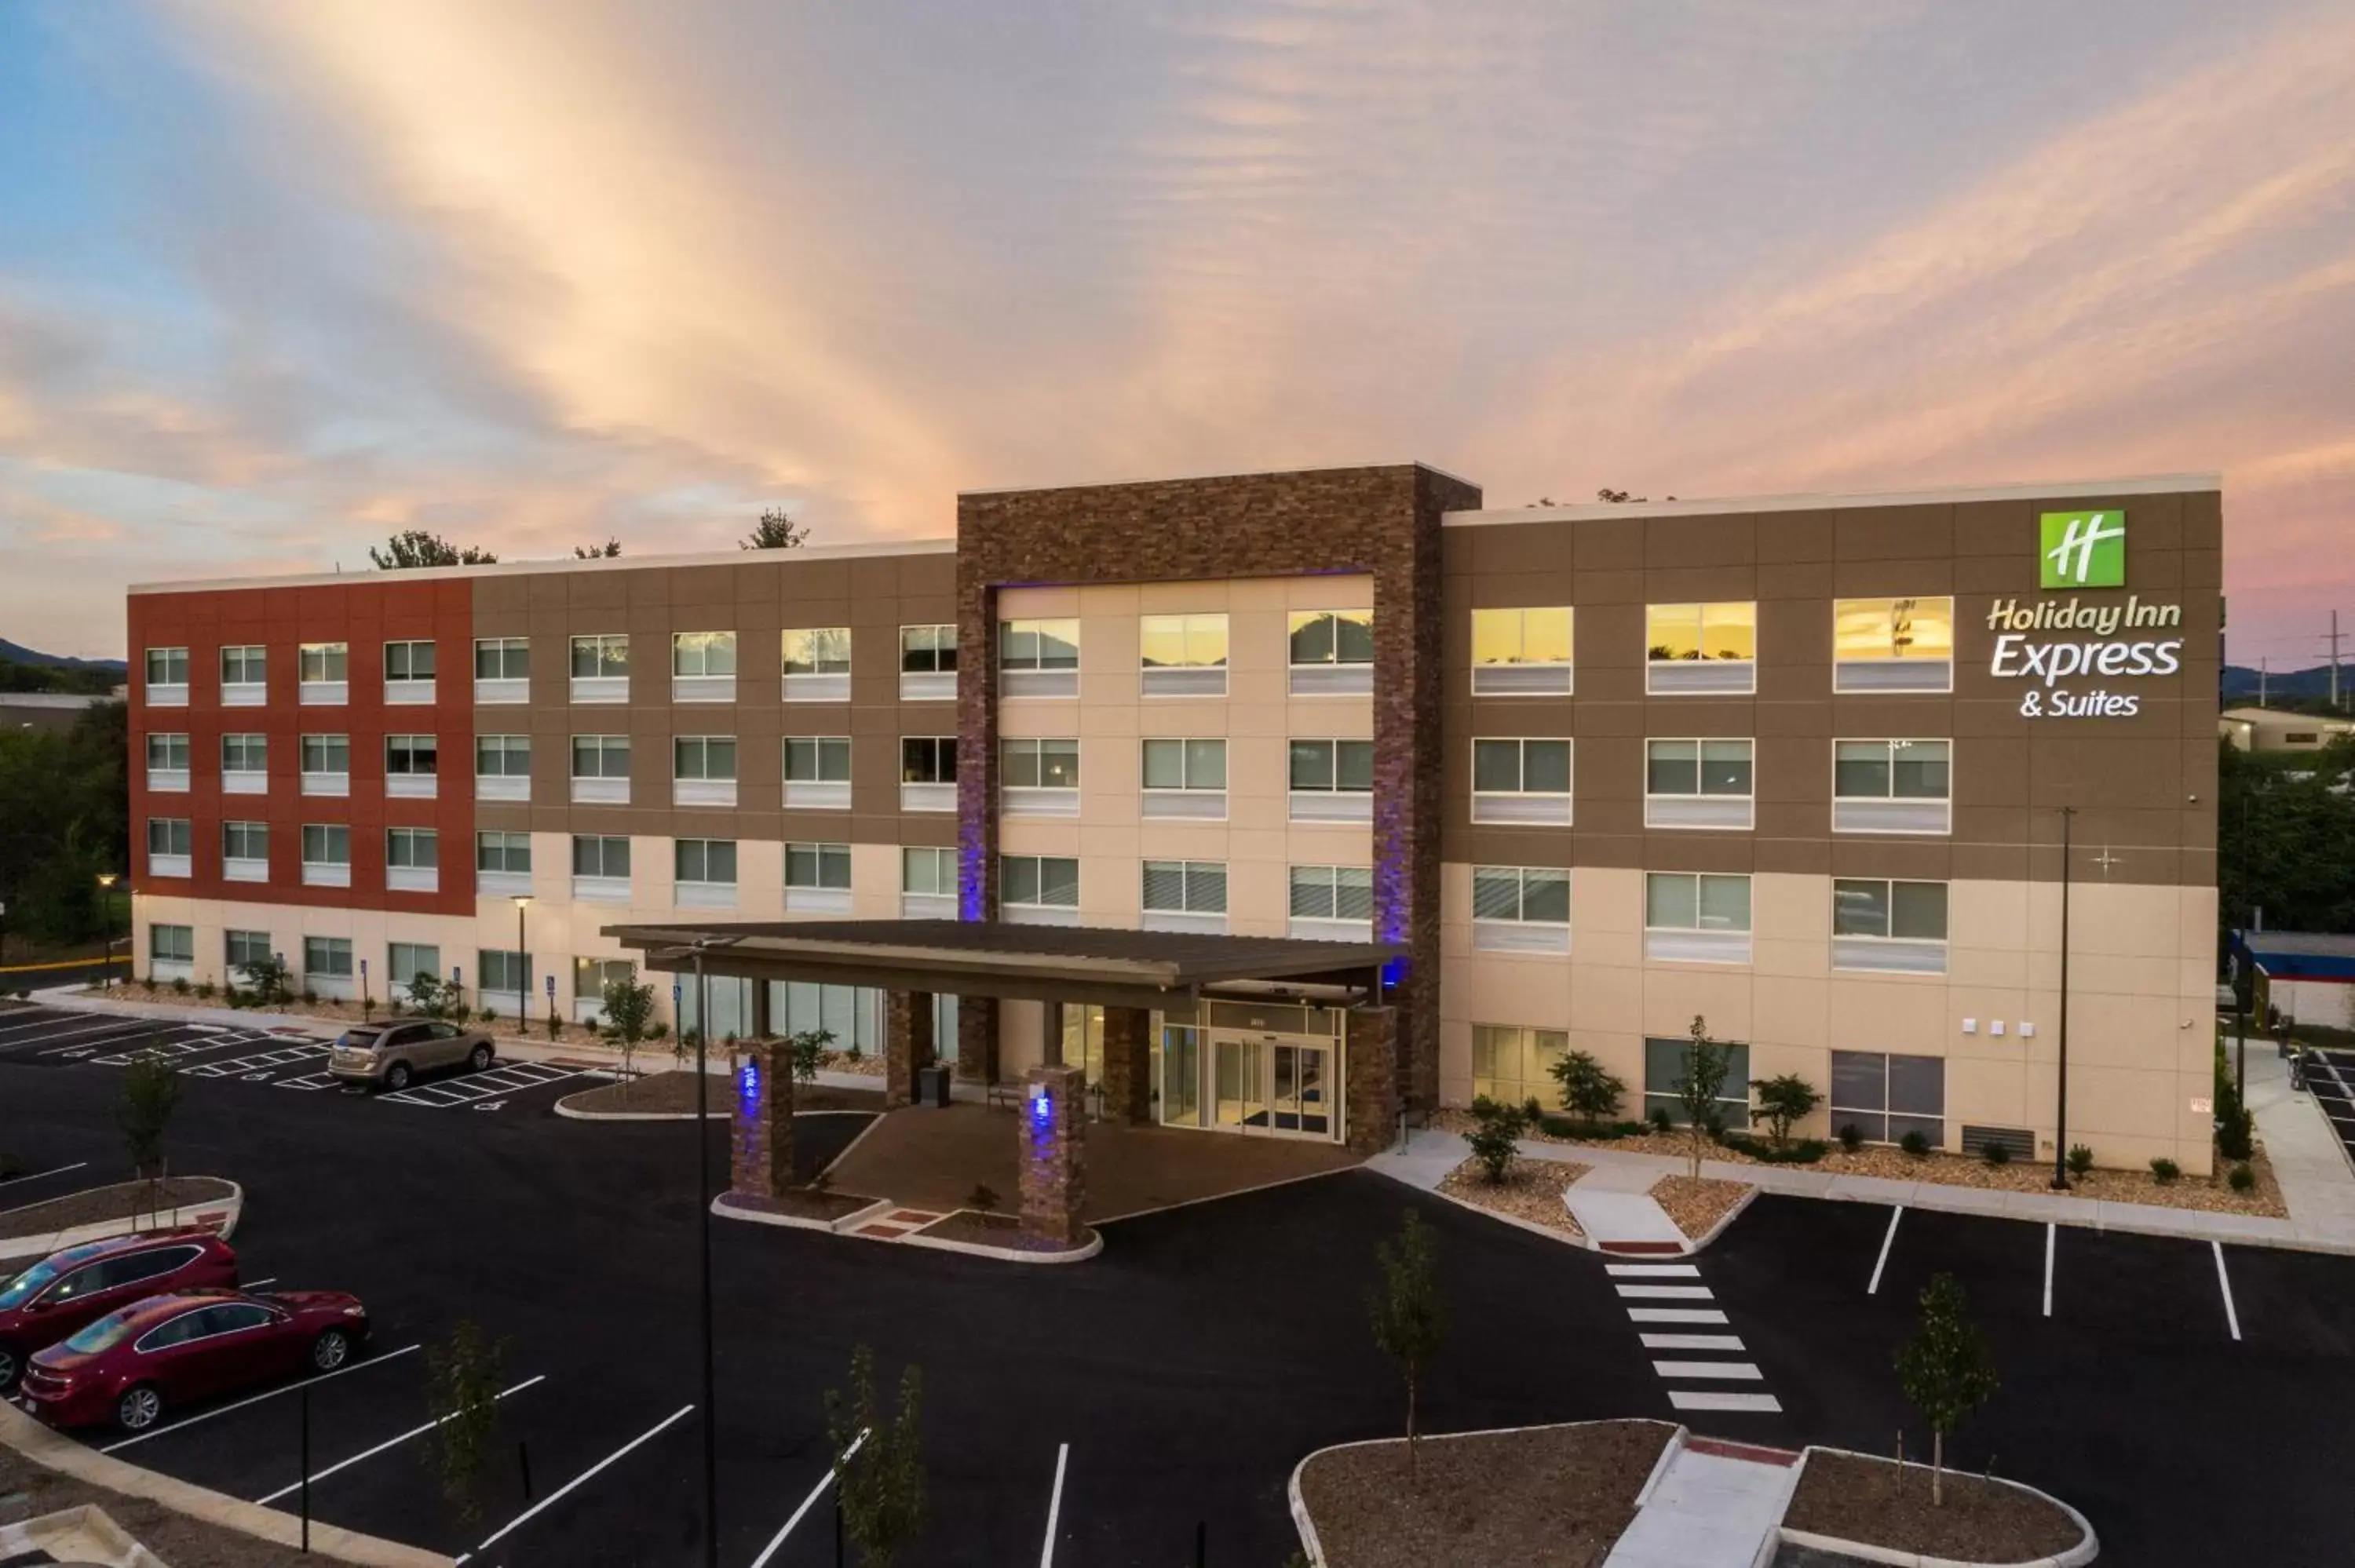 Property Building in Holiday Inn Express & Suites - Roanoke – Civic Center